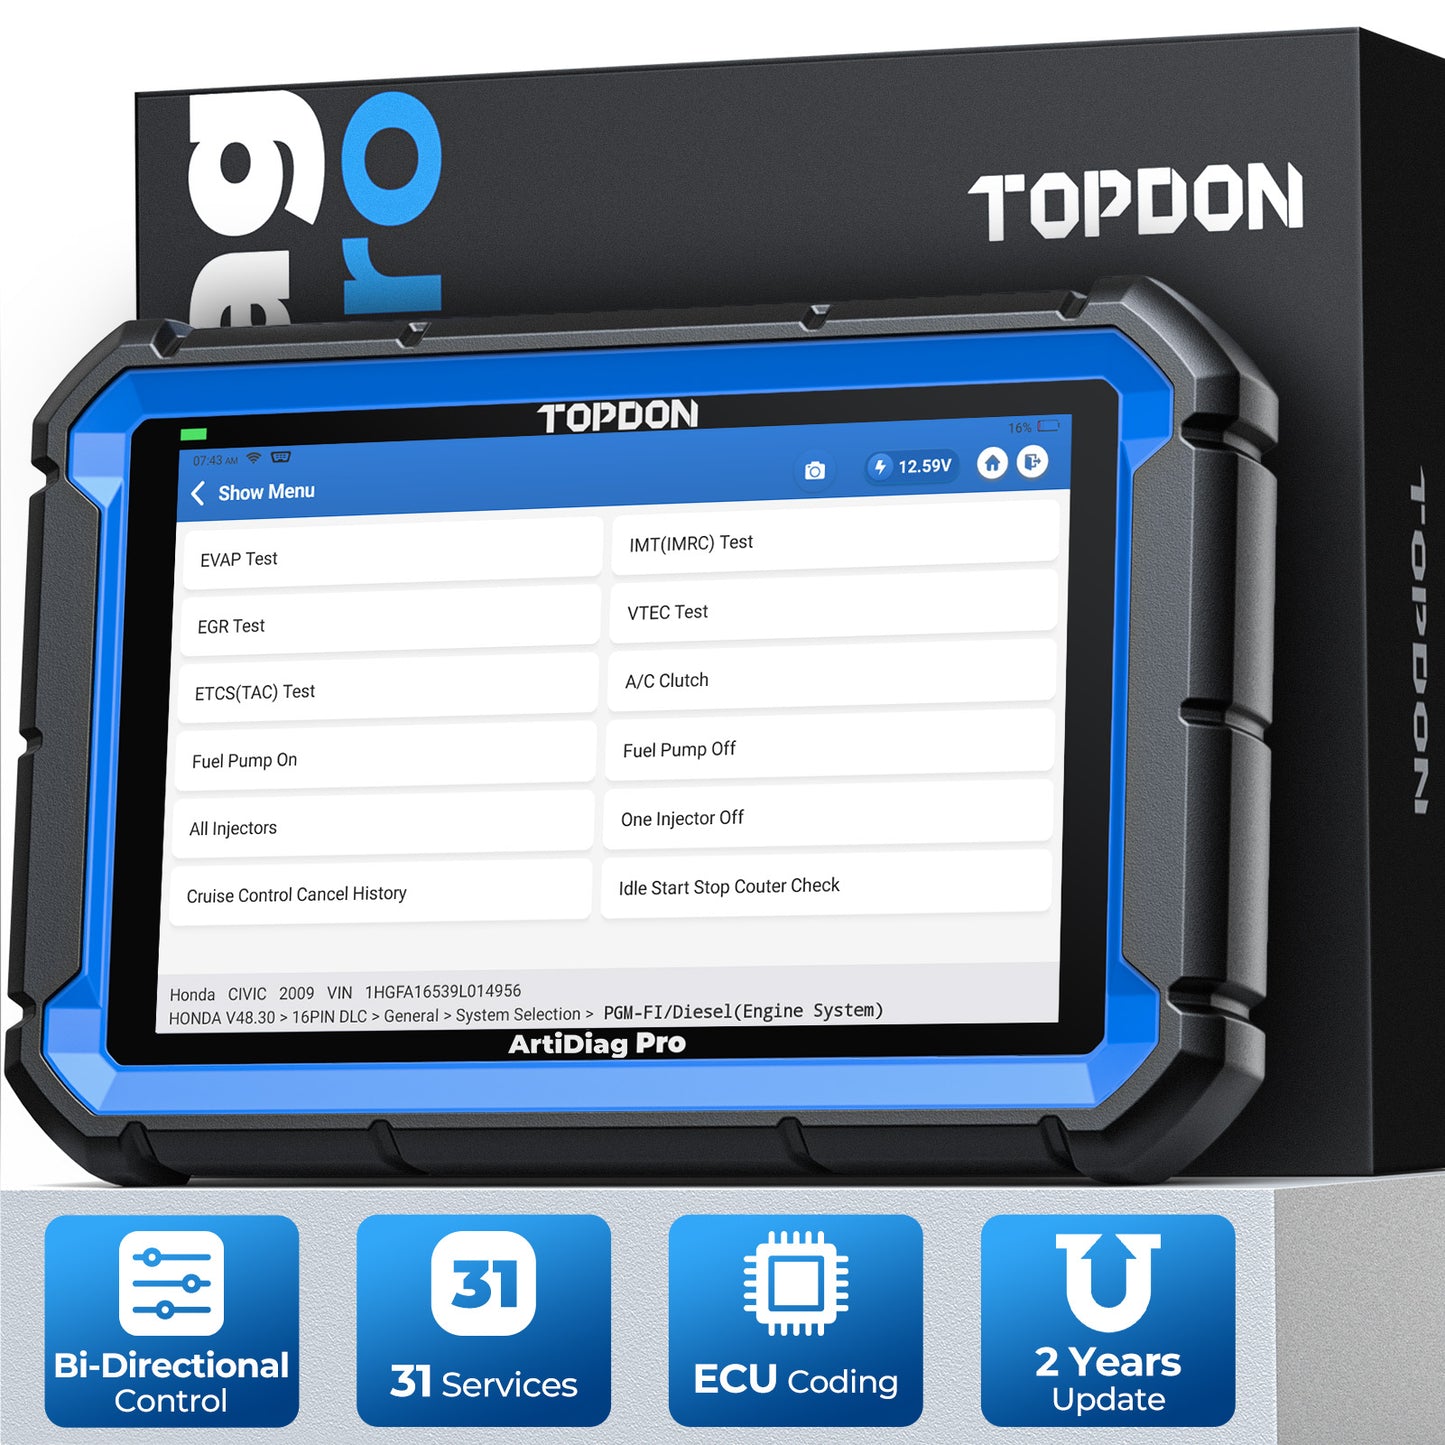 TOPDON  7" Scan Tool w/Service Functions & Bi-Directional Controls